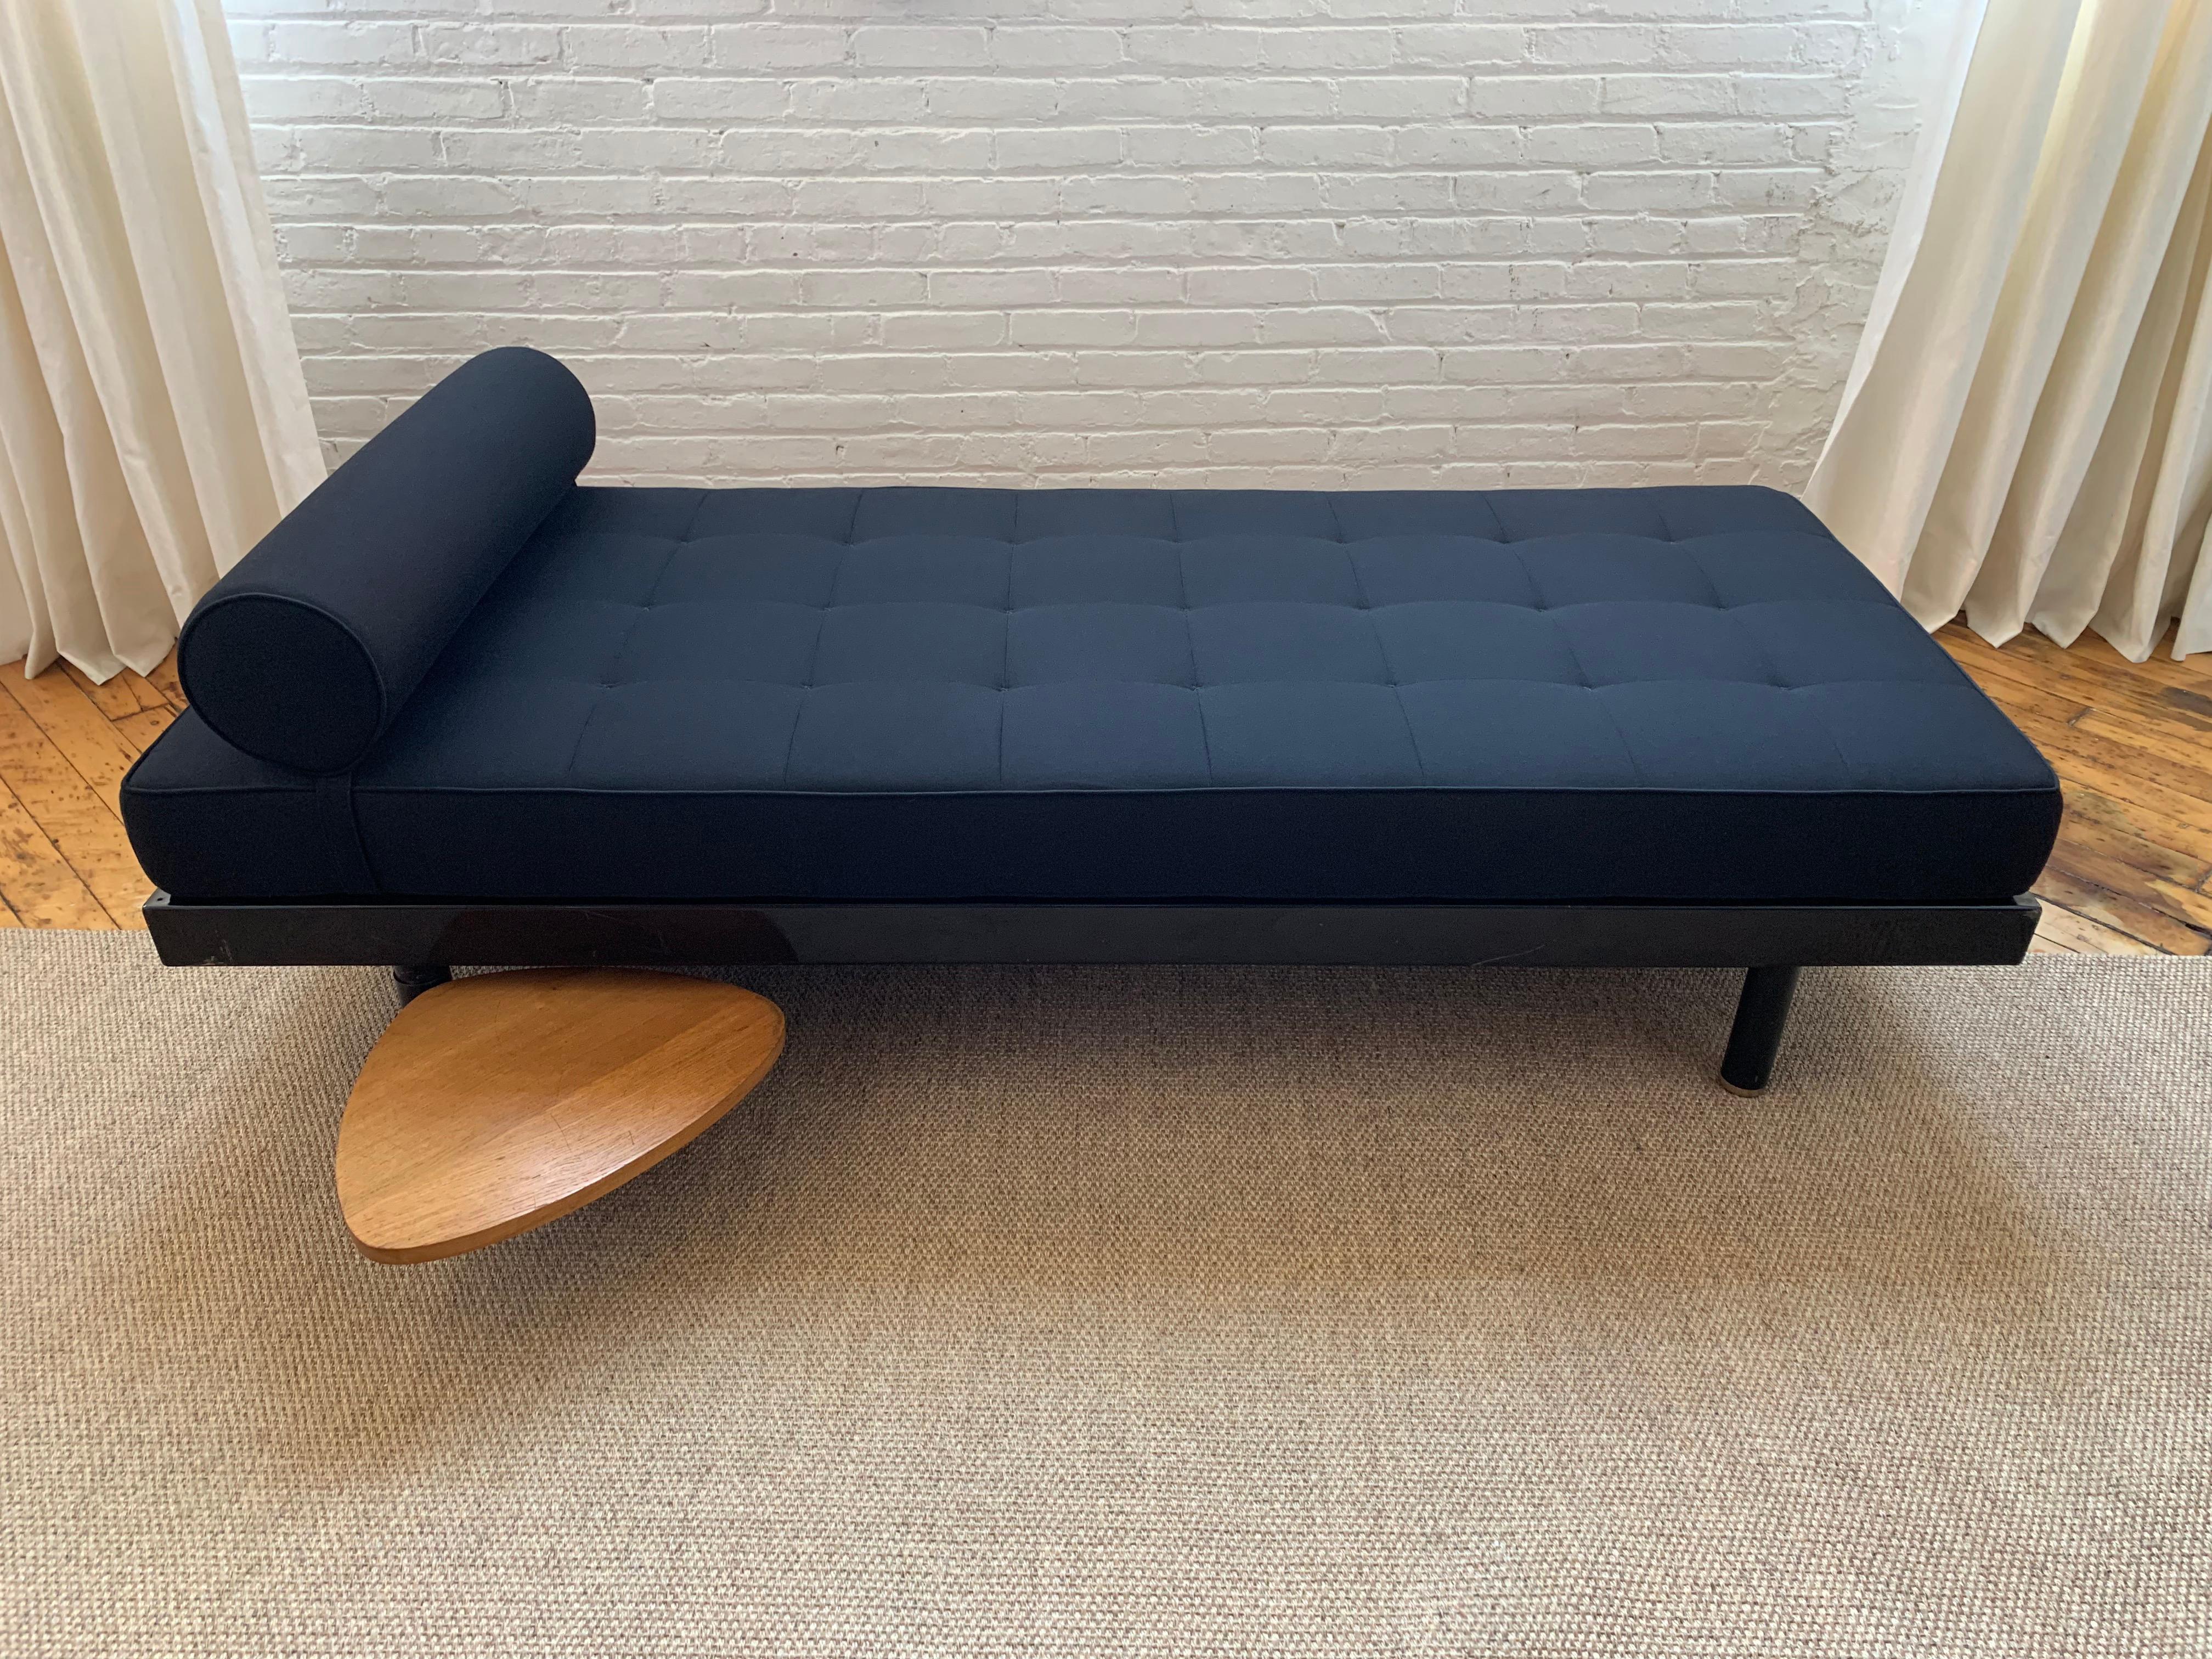 A beautiful example of a 'Antony' bed, model no.450, designed by Jean Prouvé & Charlotte Perriand for the Cité Universitaire, Antony, circa 1954. Manufactured by Les Ateliers Jean Prouvé

